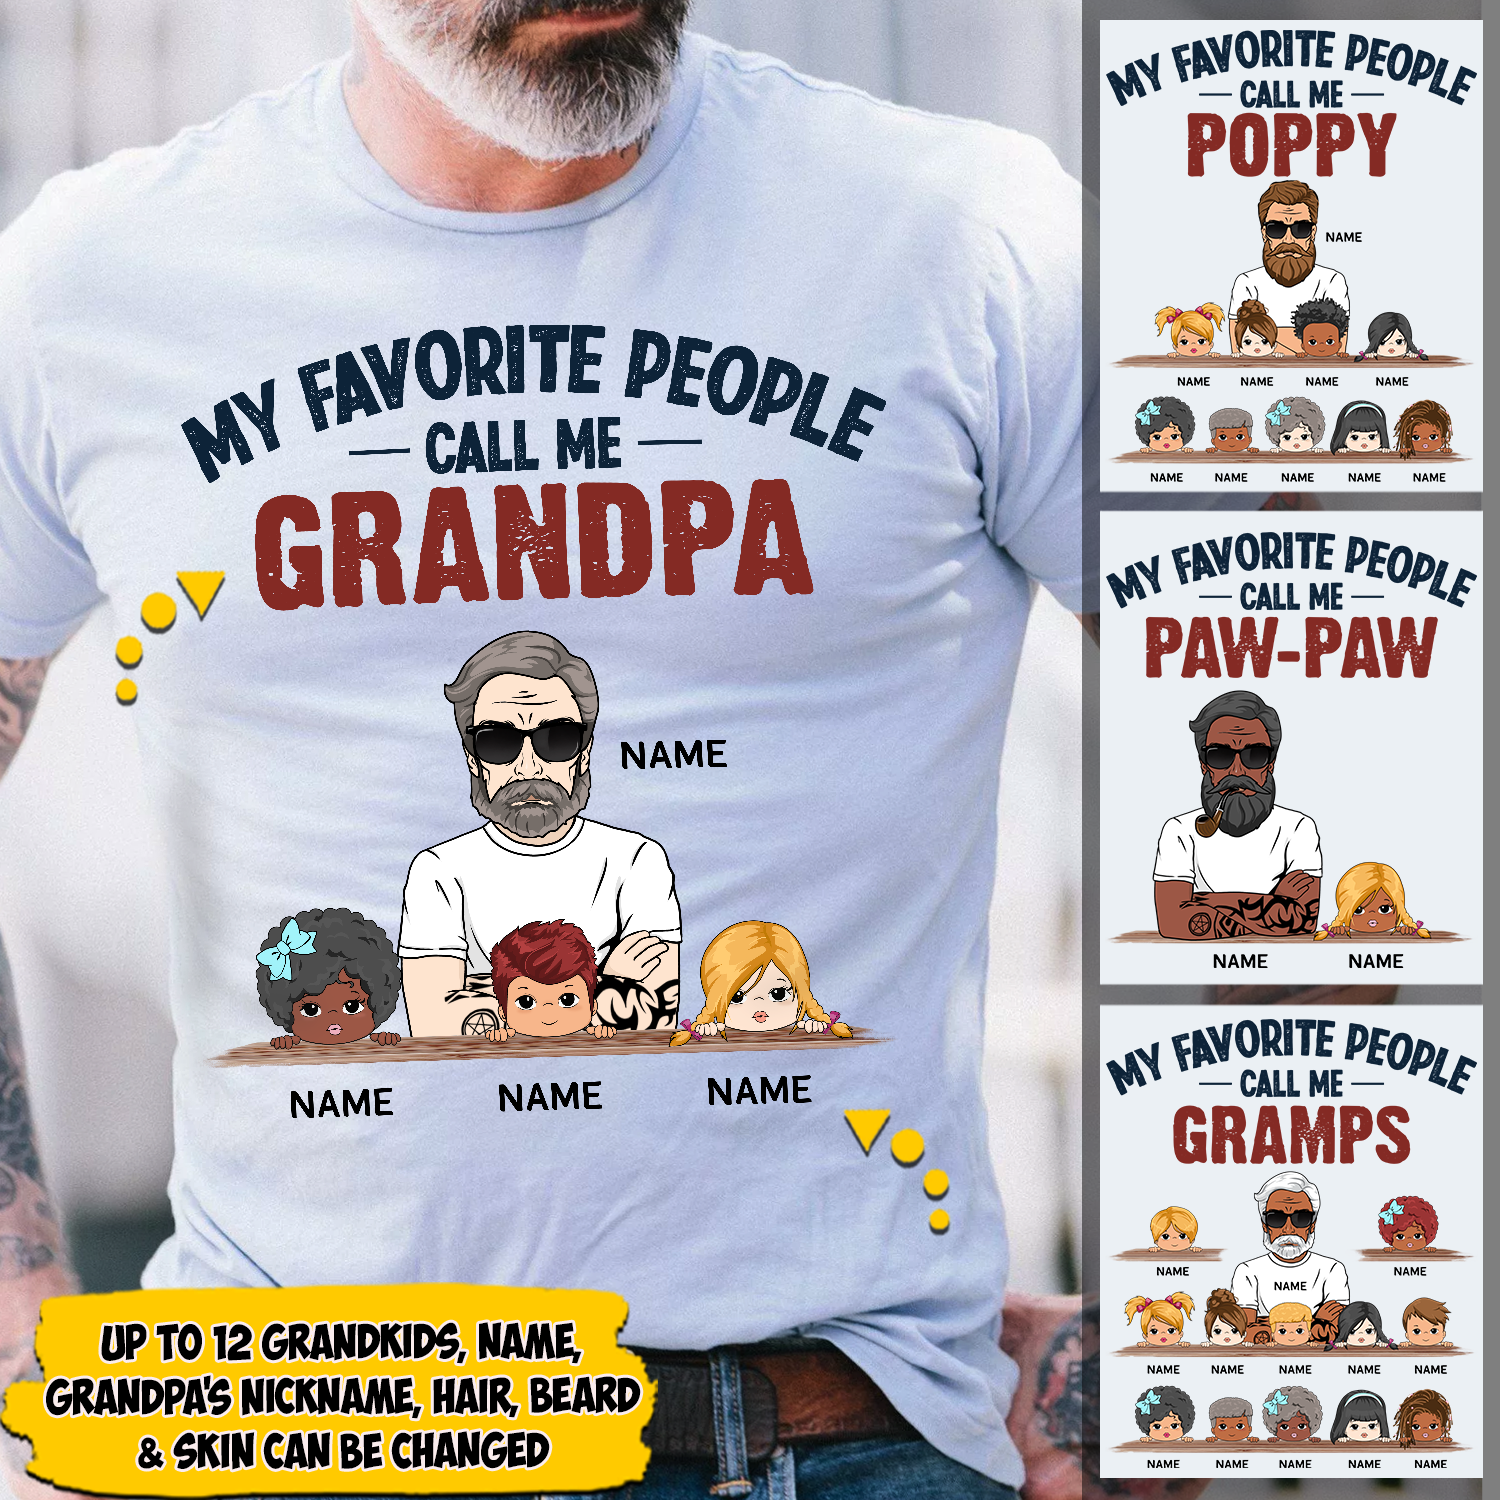 My Favorite People Call Me Grandpa Personalized Shirts, Name, Character & Kid's name can be changed, LOQN